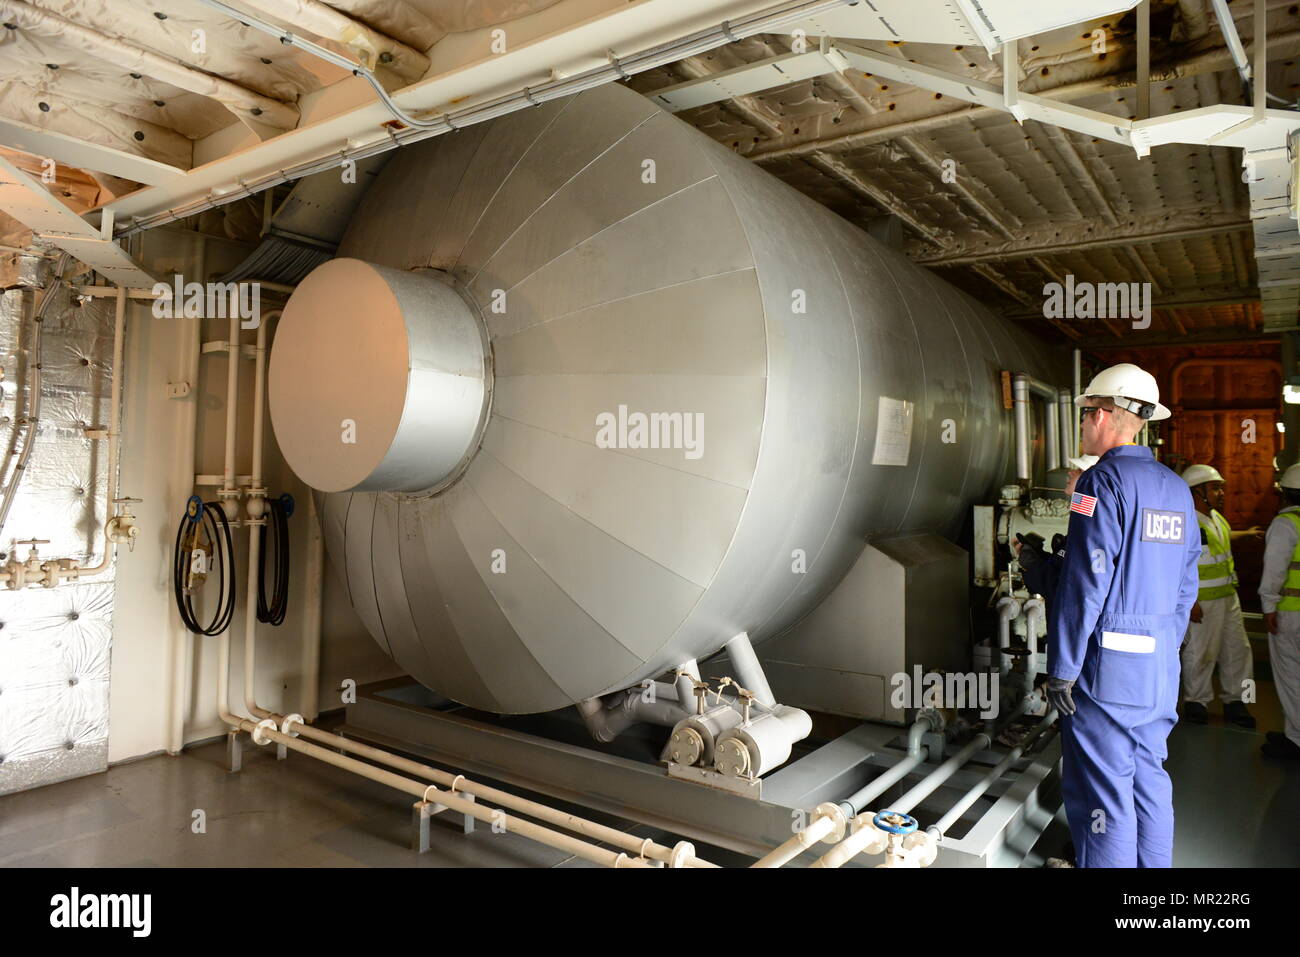 Petty Officer 1st Class Eric Kelley, a marine science technician at Coast Guard Marine Safety Unit Portland, stands next to a low-pressure C02 system tank aboard the vessel Morning Catherine during a Port State Control exam at the Port of Portland, Portland, Ore., May 1, 2017.     Kelley checks the general condition of the tank, specifically if there is any ice or frost build up, which might indicate a leak in the tank or faulty insulation. Stock Photo